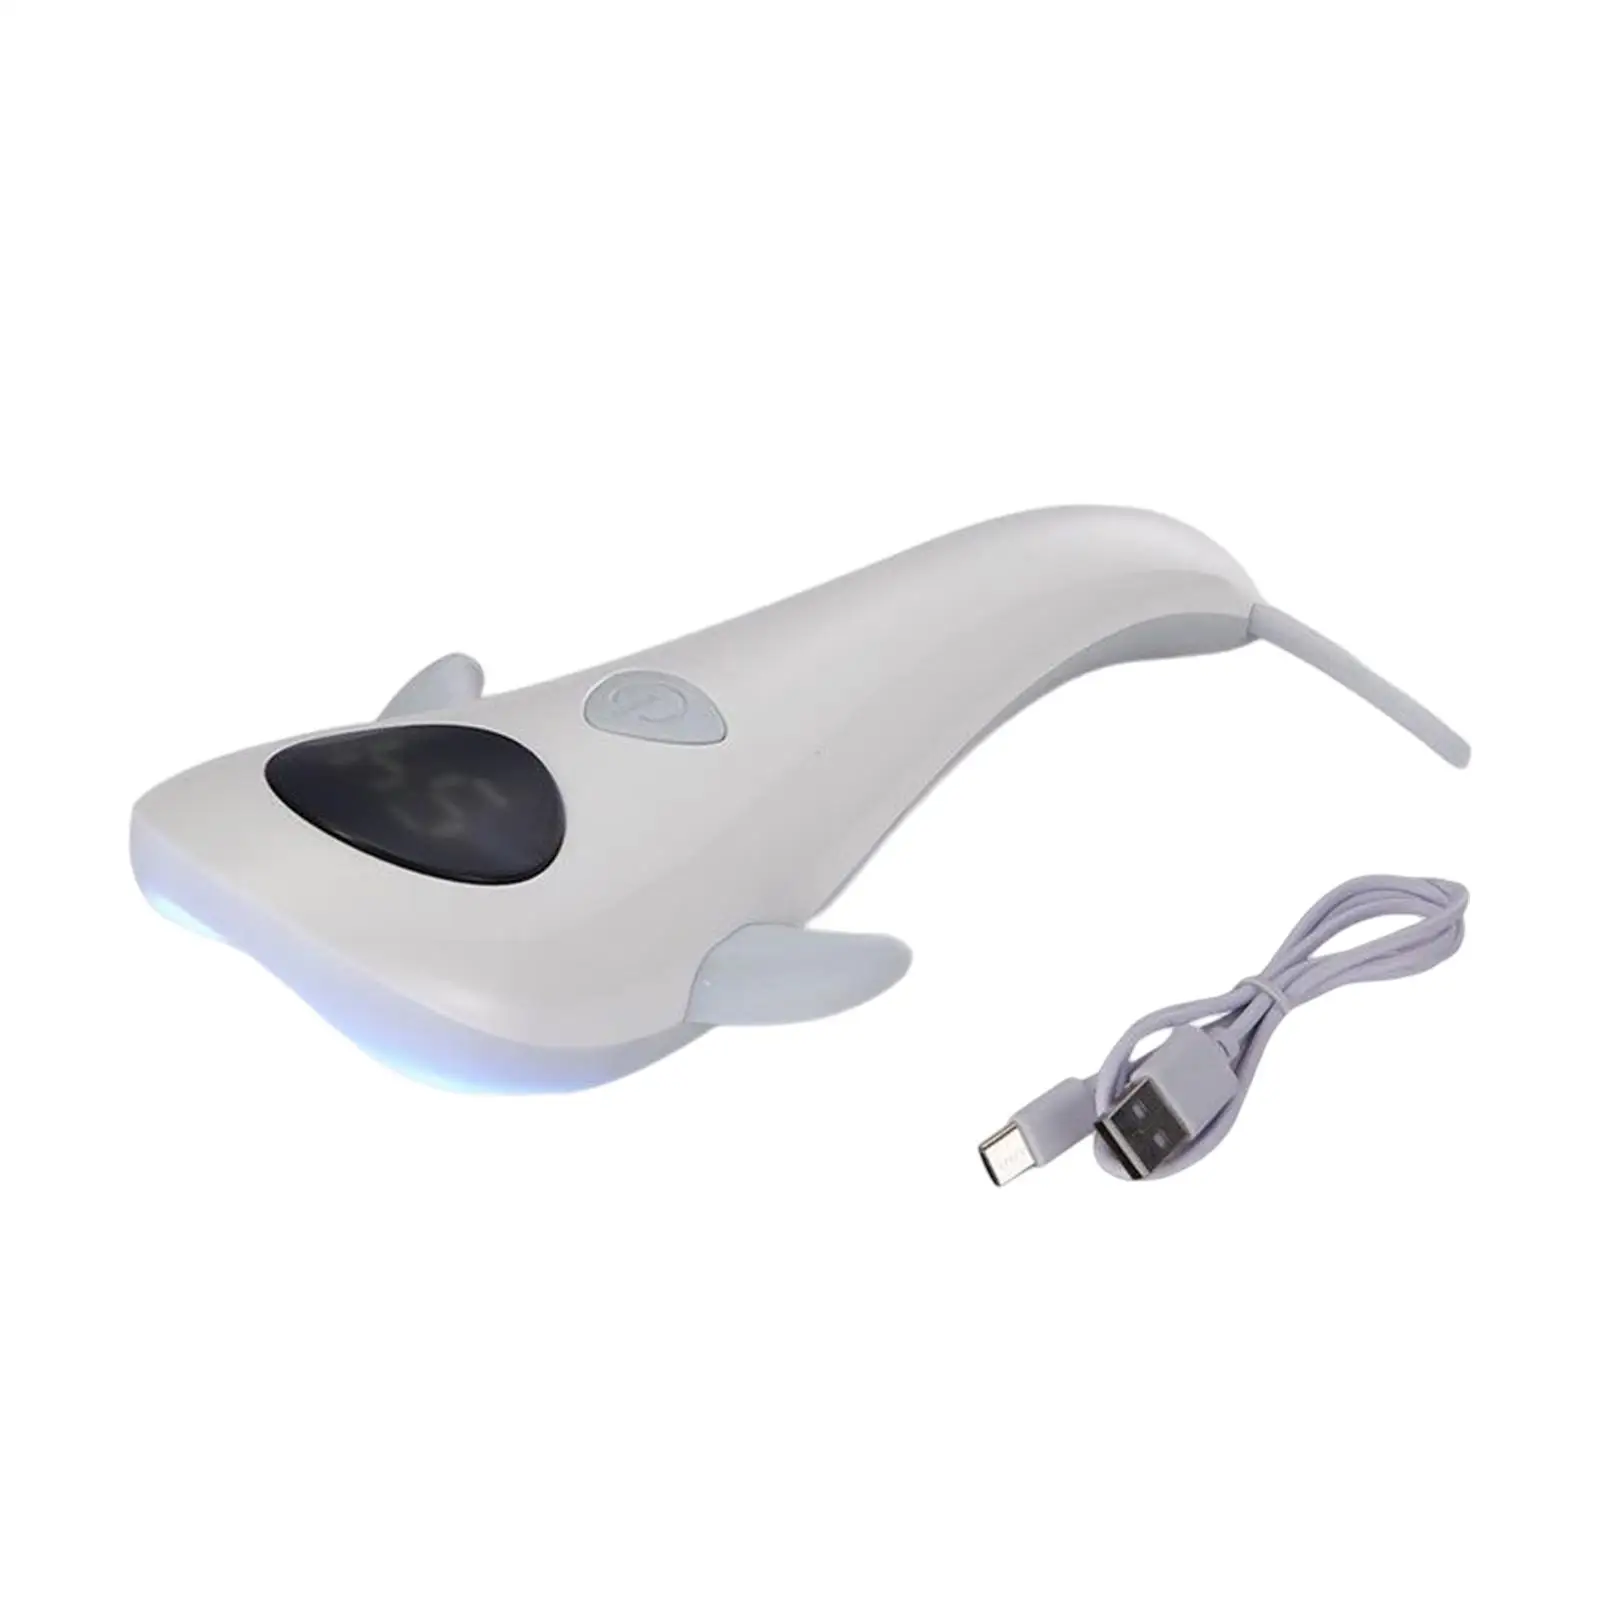 Professional Nail Lamp with 60S 90S 2 timers Salon Use Use C Nail Polish Curing Digital Display 3 Lamp Beads 5W Nail Dryer